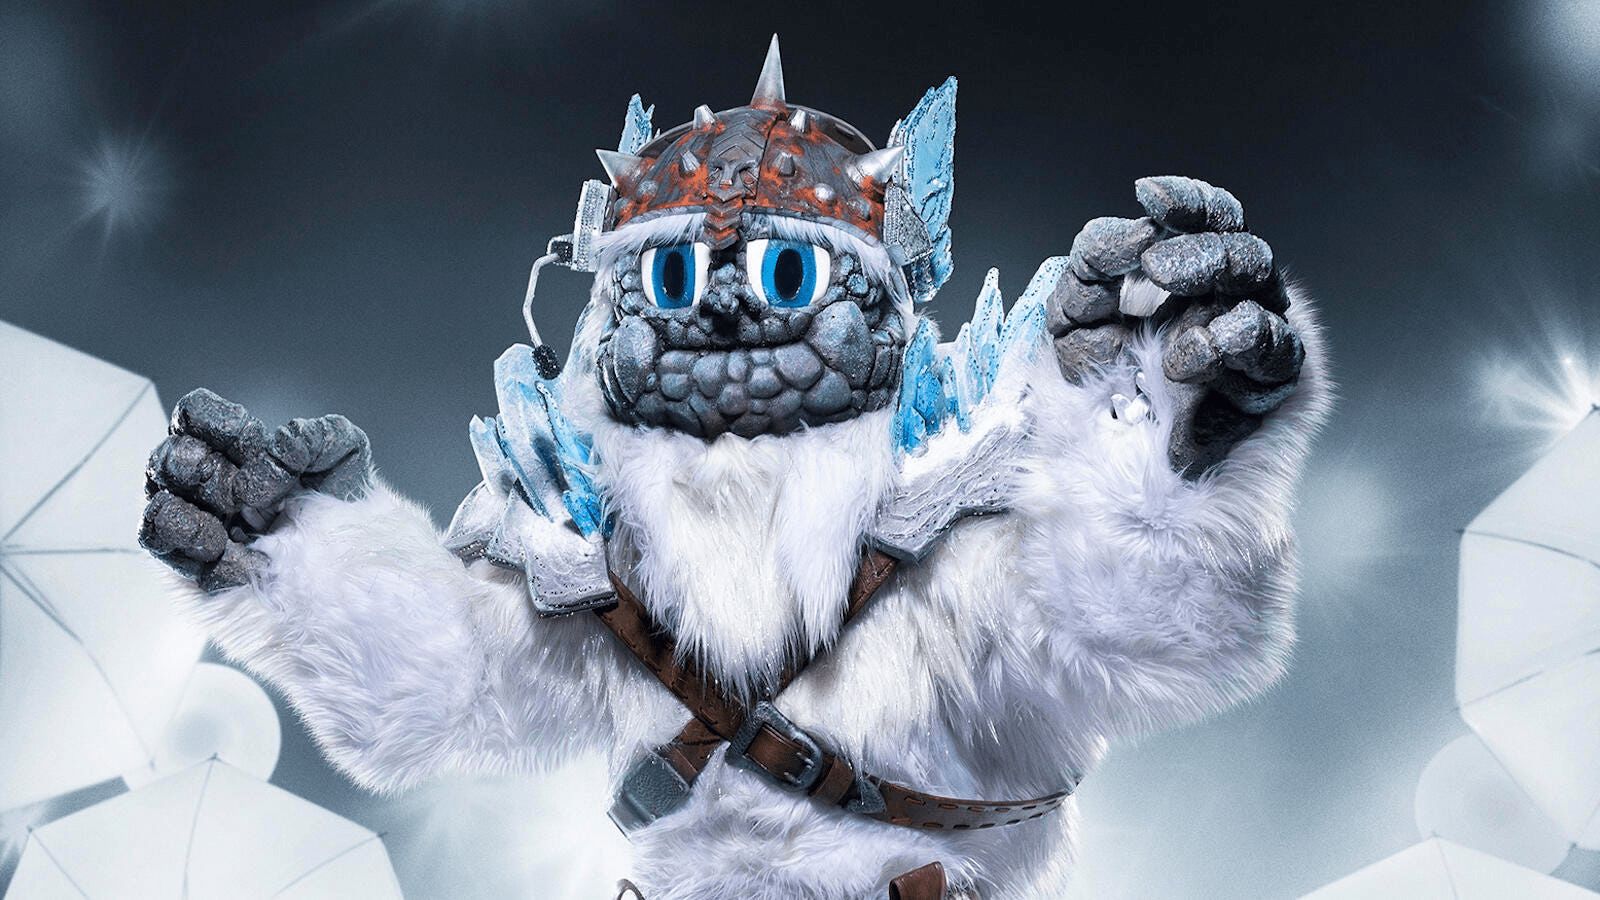 10 Epic Costumes from The Masked Singer Season 5